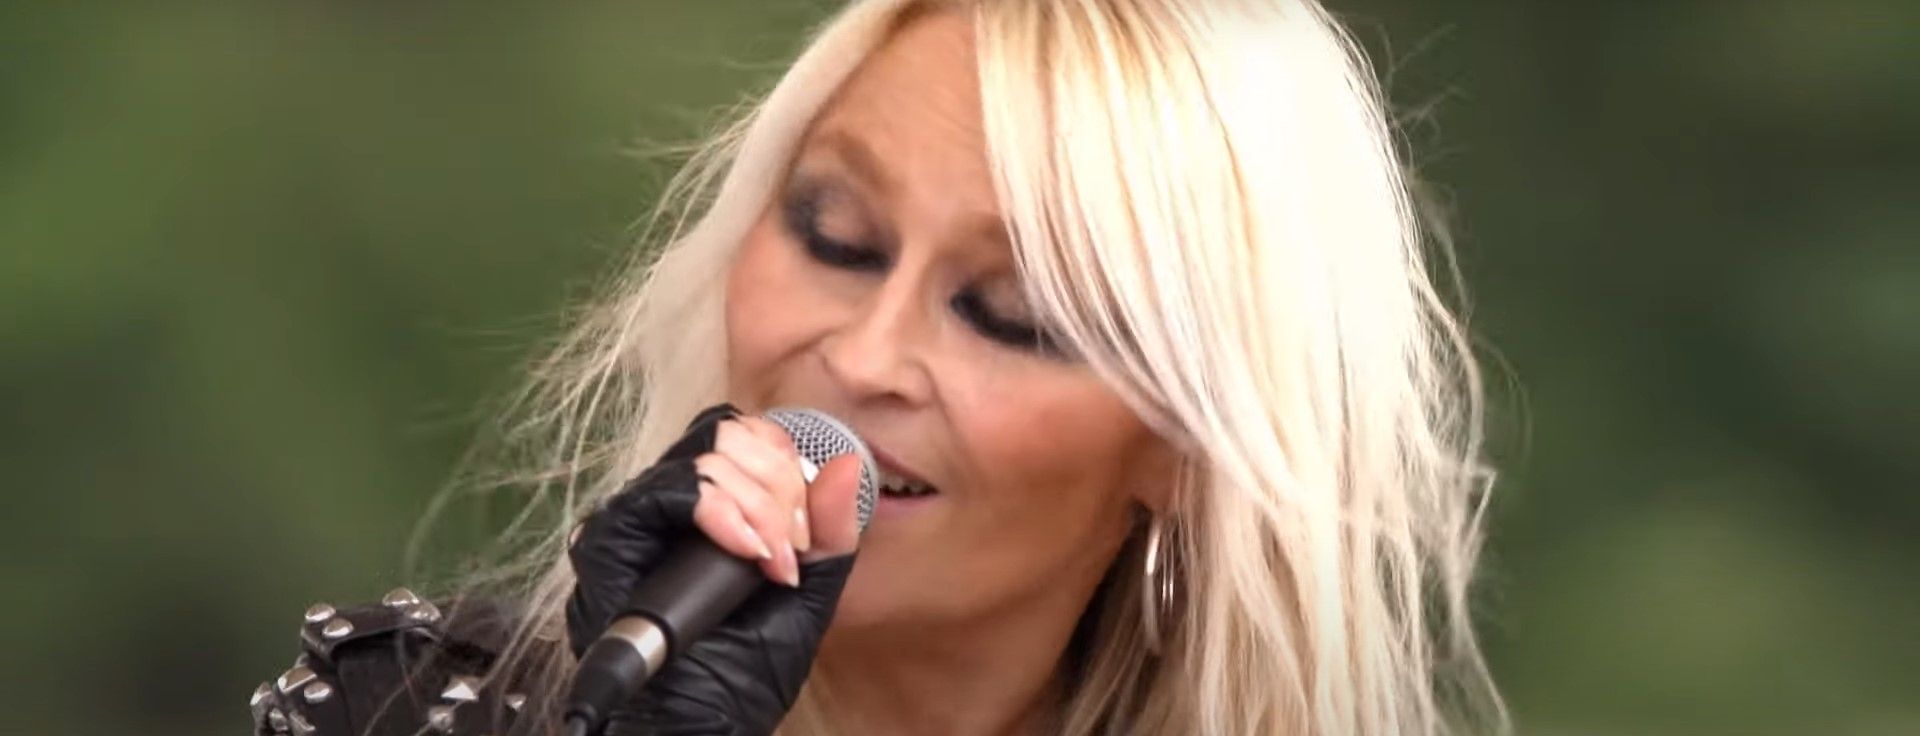 Doro - I Rule The Ruins / Für Immer / All We Are / A Thousand Years (Live 2020)